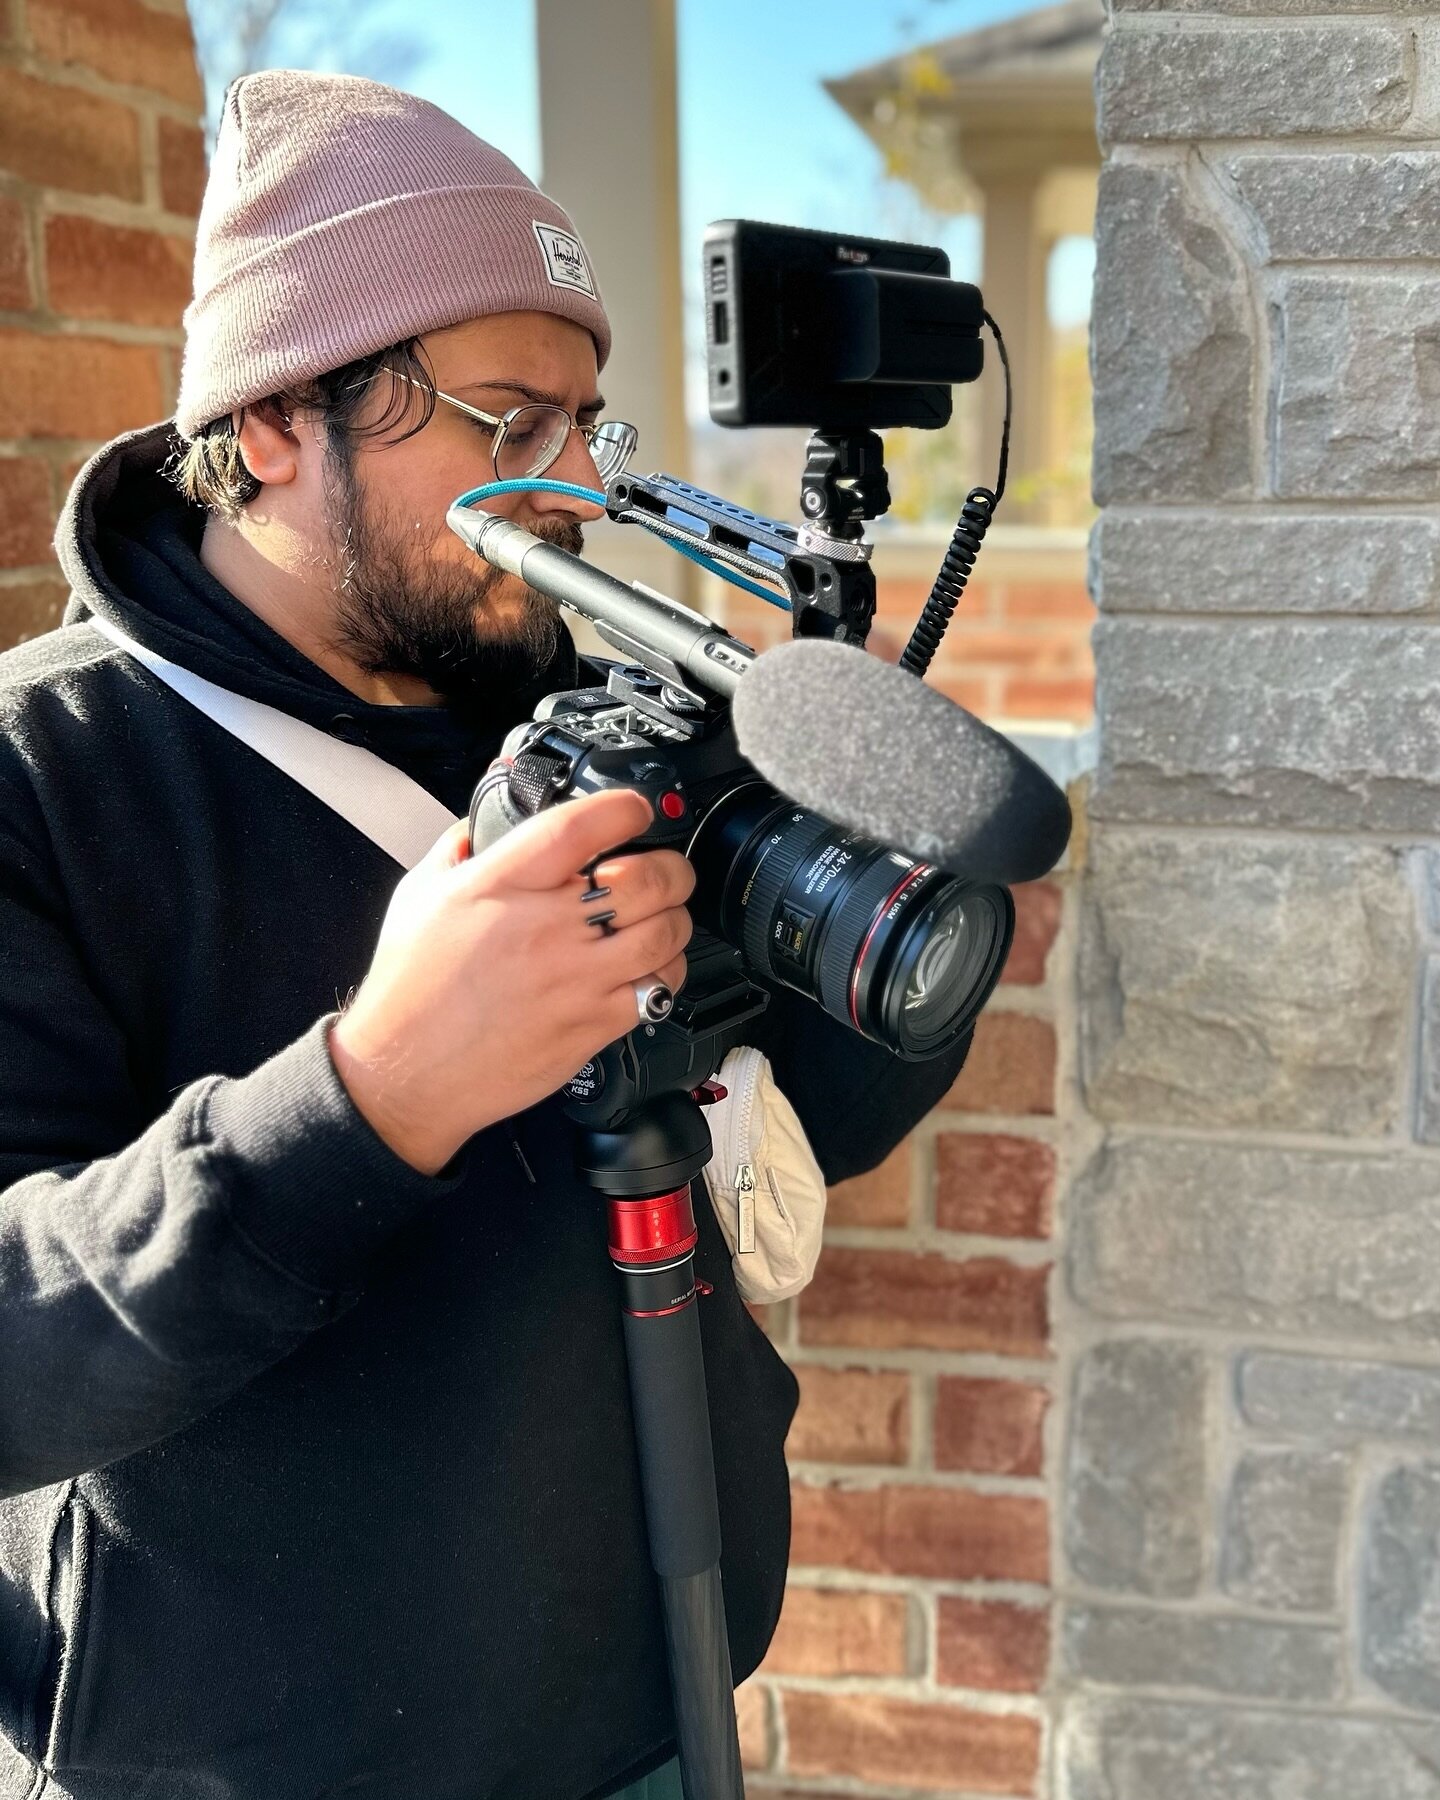 I typically don&rsquo;t post any pictures of me (especially while working), so I&rsquo;m always super thankful when someone else does. 

This is my &ldquo;I&rsquo;m getting the shot&rdquo; look. 

Photo creds: @aliraza_rashid